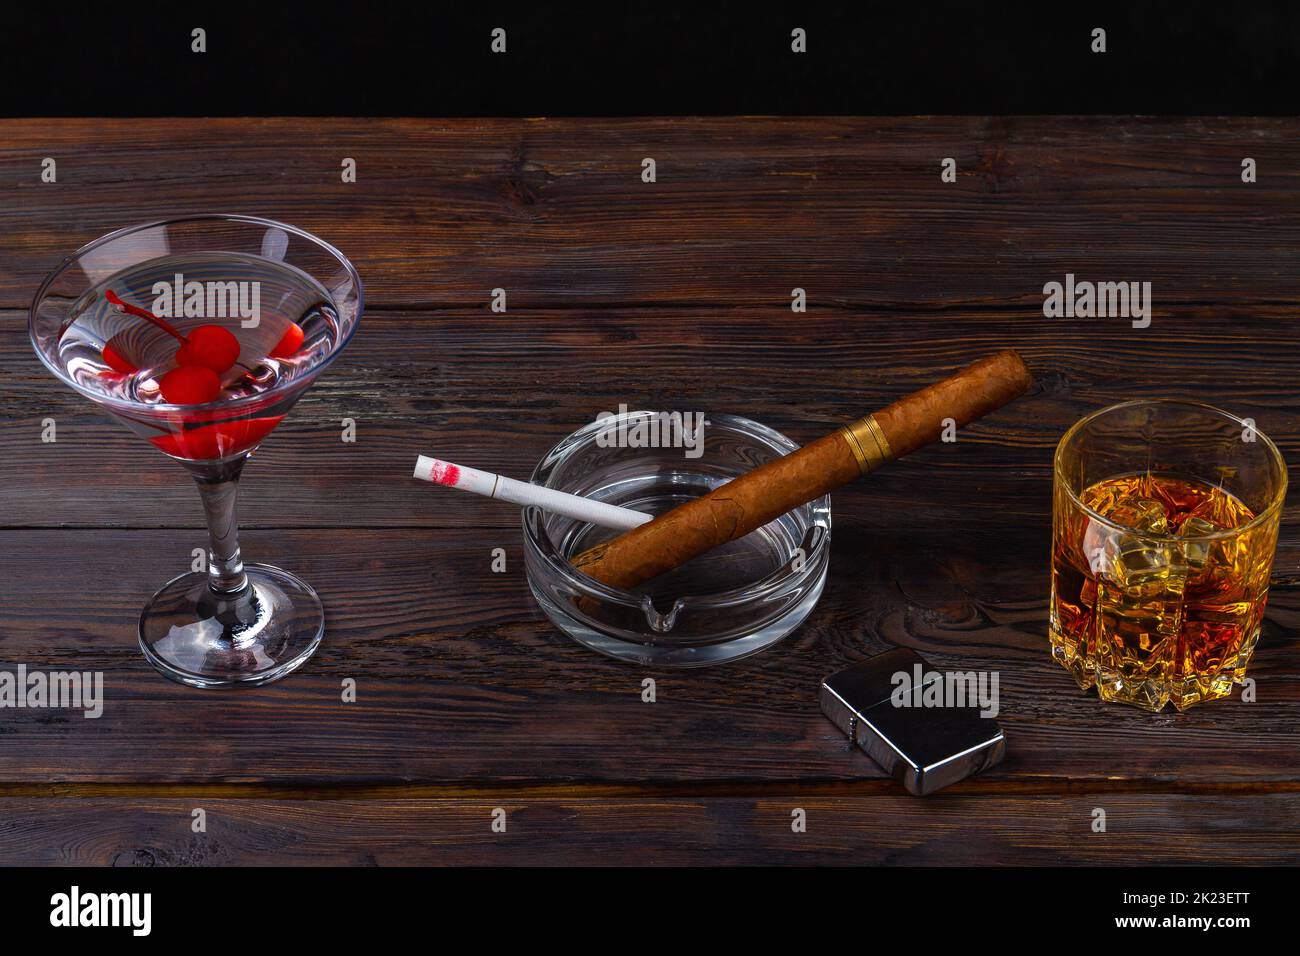 Alcoholic cocktails and cigarettes on brown desk. Cigar and cigarette in ashtray. Glass of whiskey and martini. Stock Photo